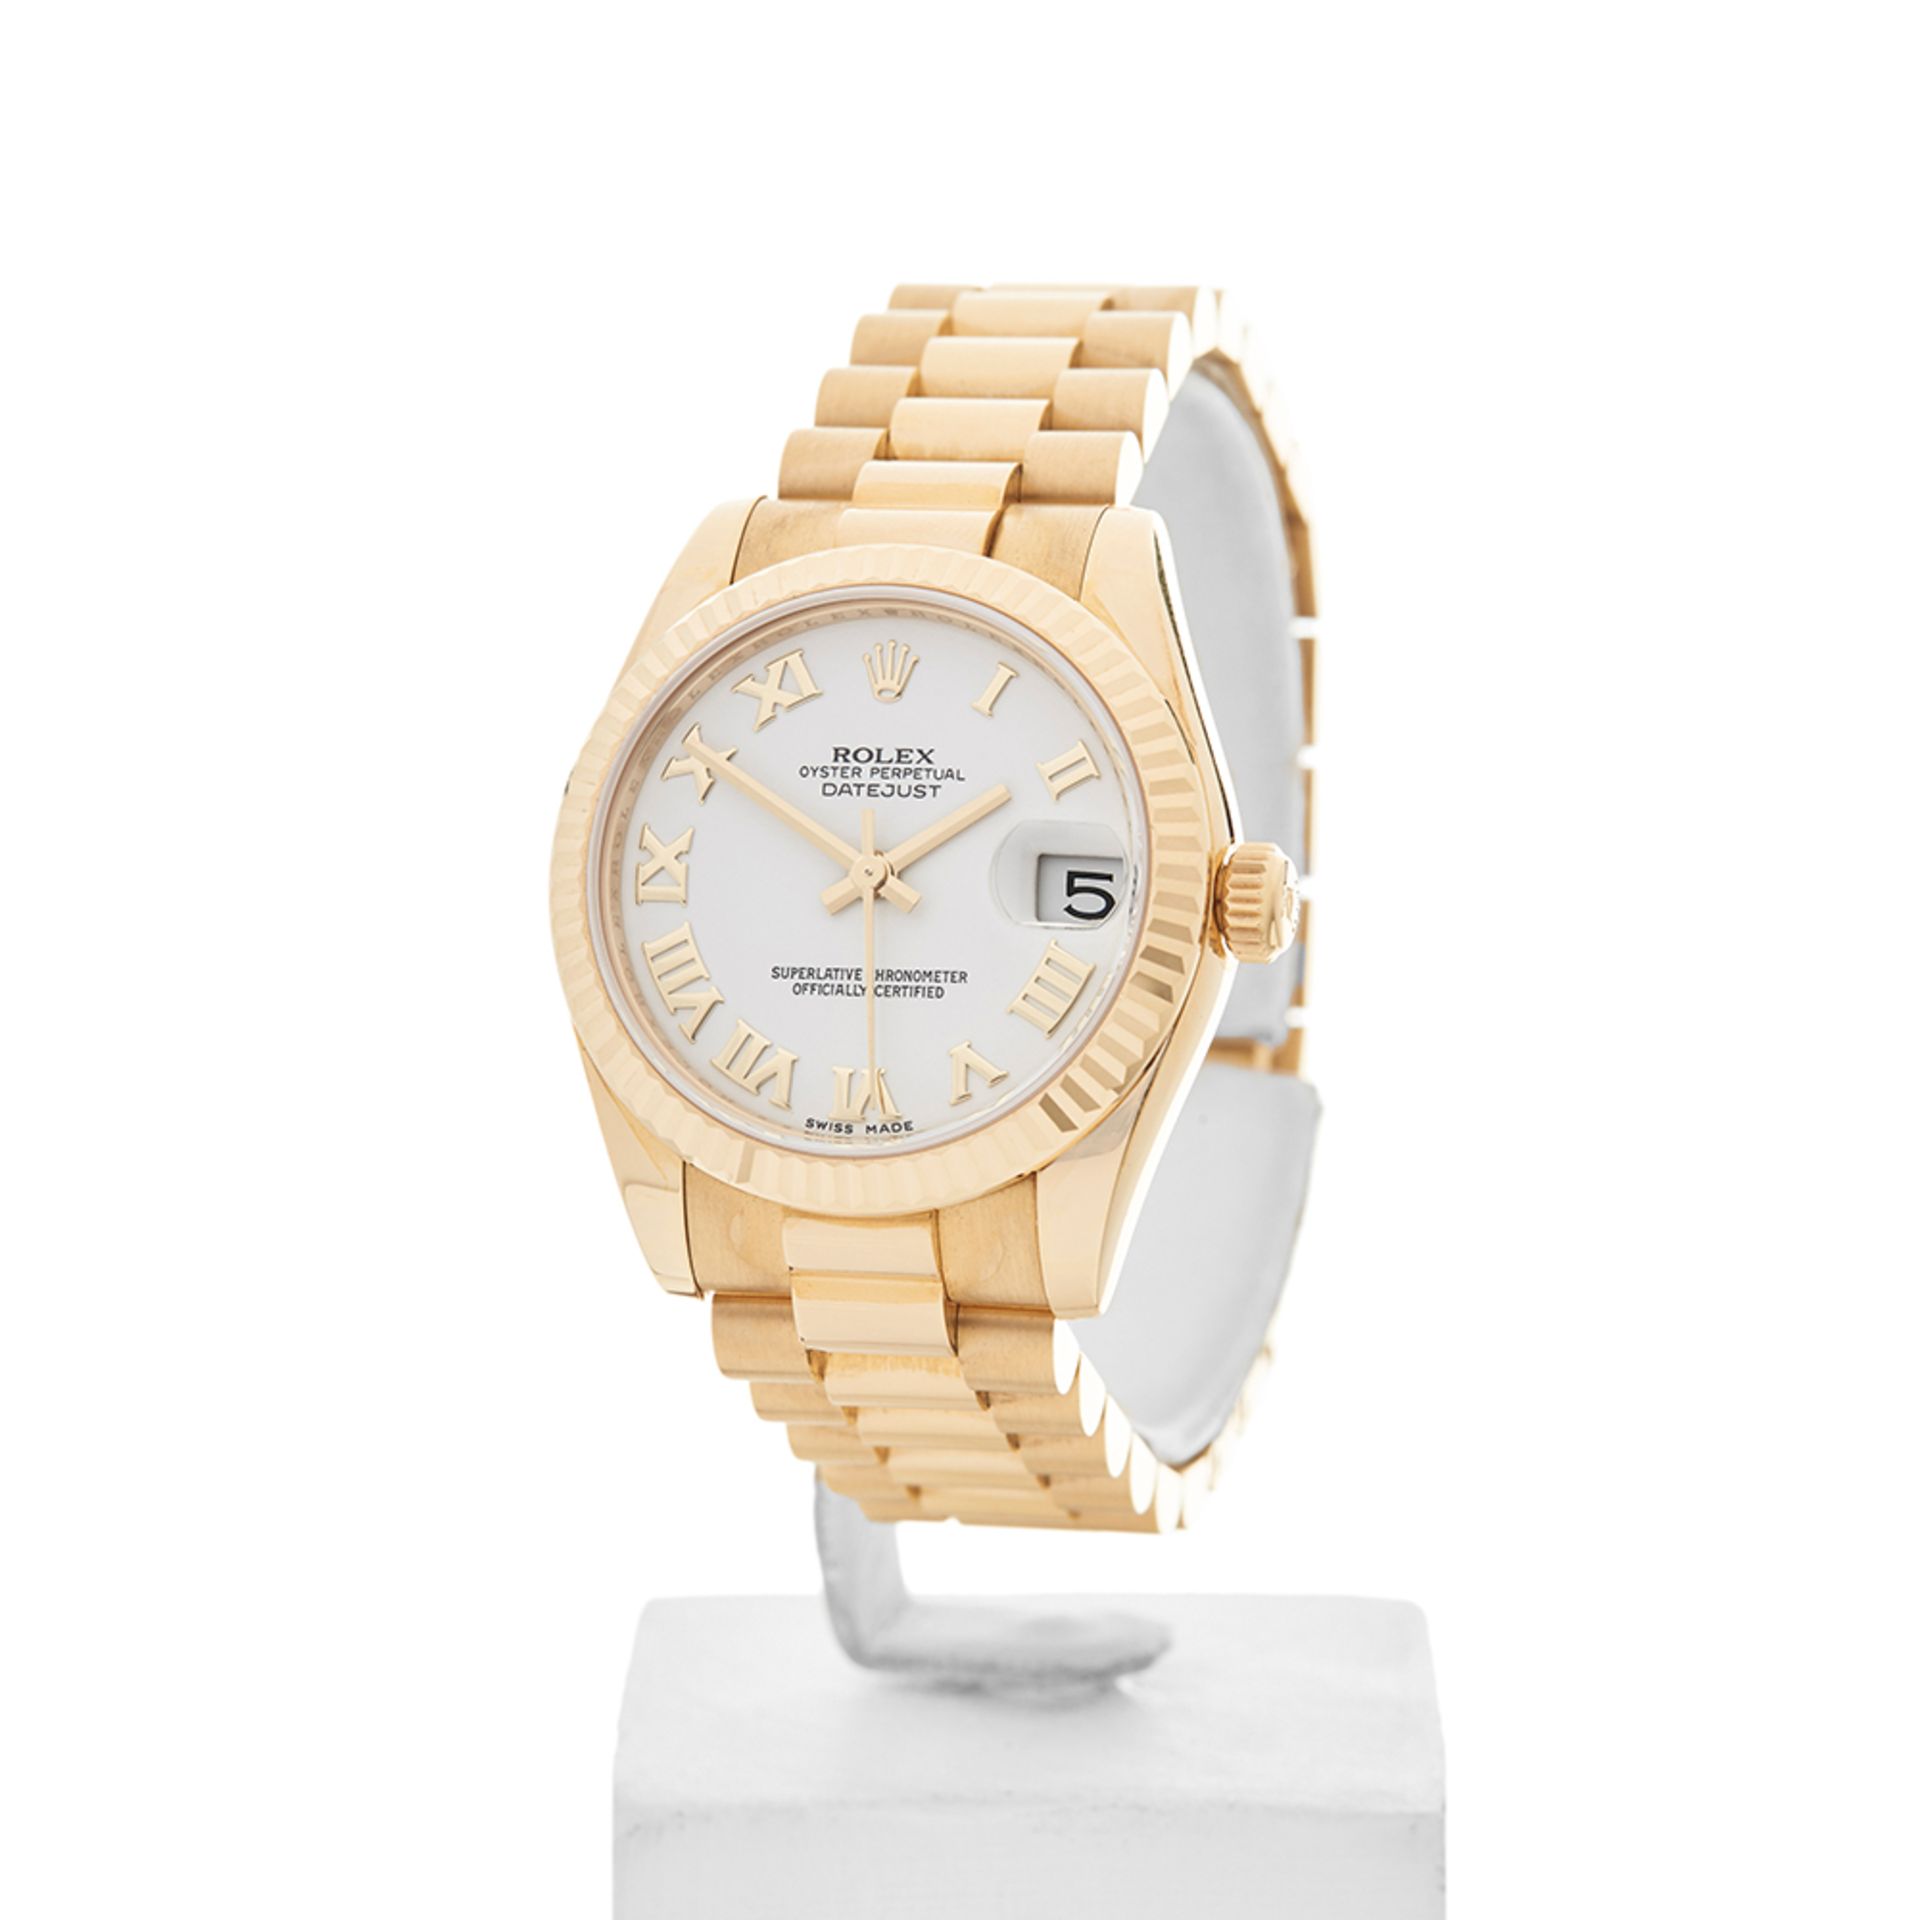 Datejust 31mm 18K Yellow Gold - 178278 - Image 3 of 9